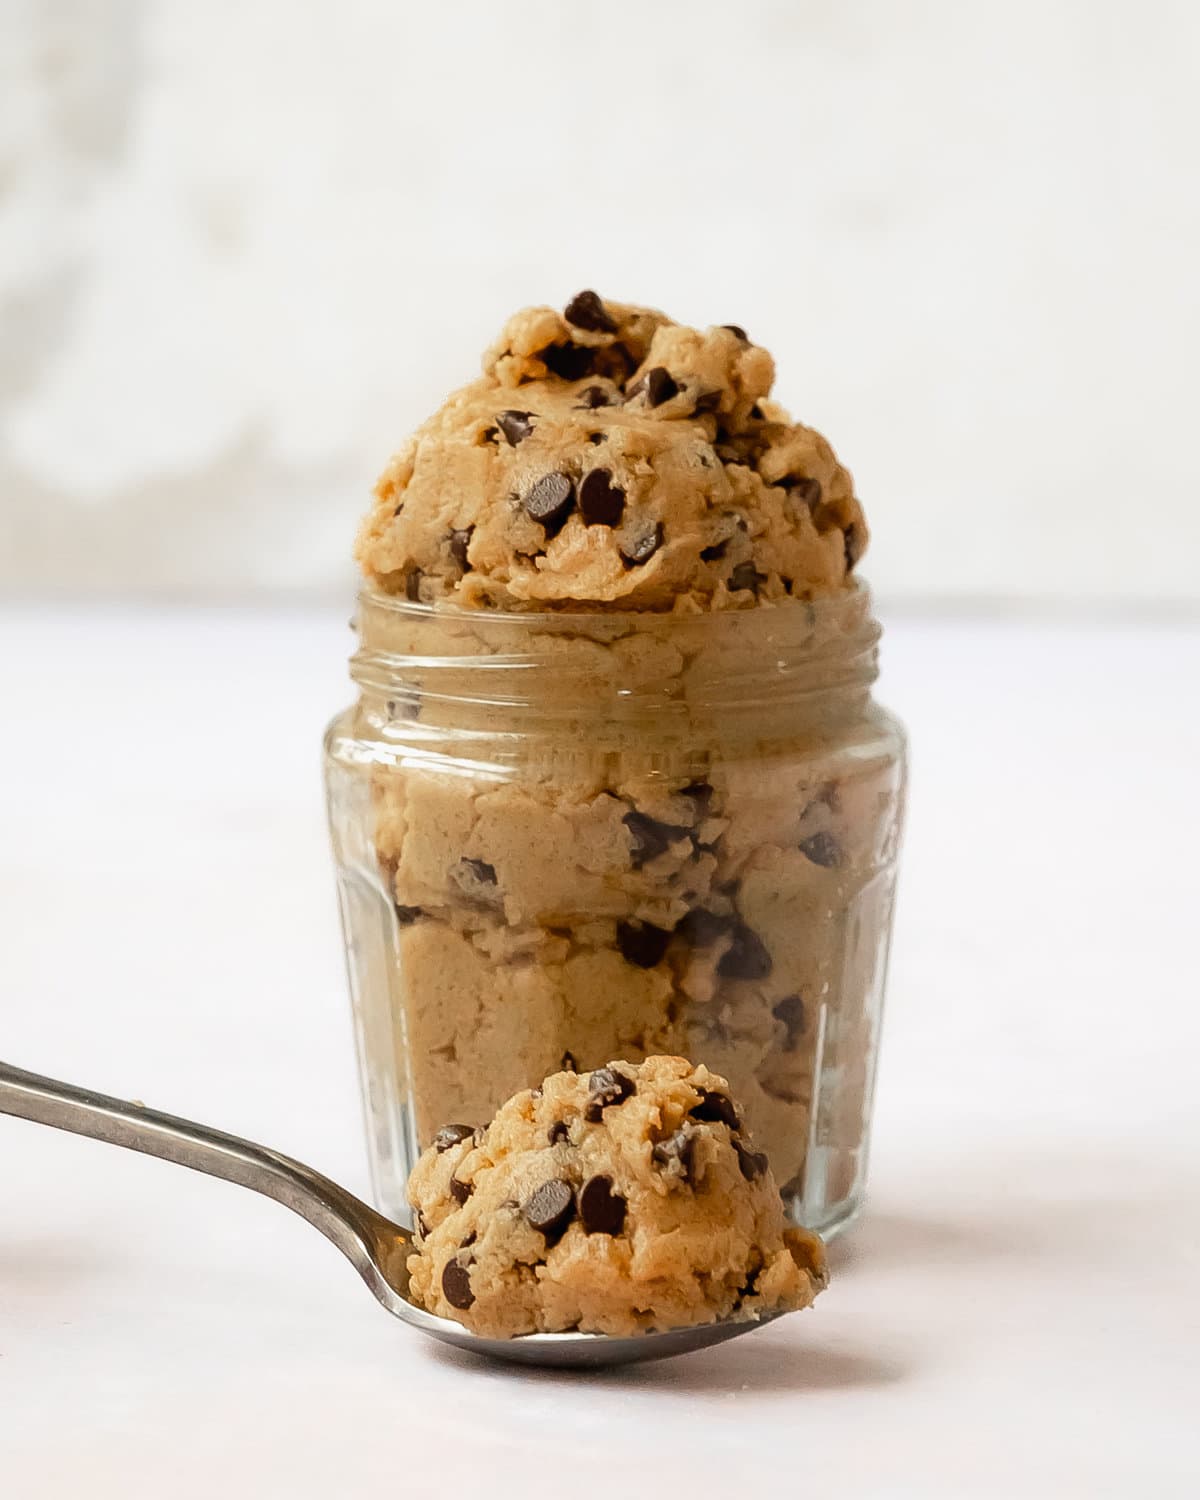 Vegan cookie dough is a quick and easy edible chocolate chip cookie dough. This vegan edible cookie dough is made with simple ingredient, is gluten and dairy free and can be made refined sugar free, too. If you’re a fan of eating scoops of cookie dough by the spoonful, this vegan chocolate chip cookie dough is for you!